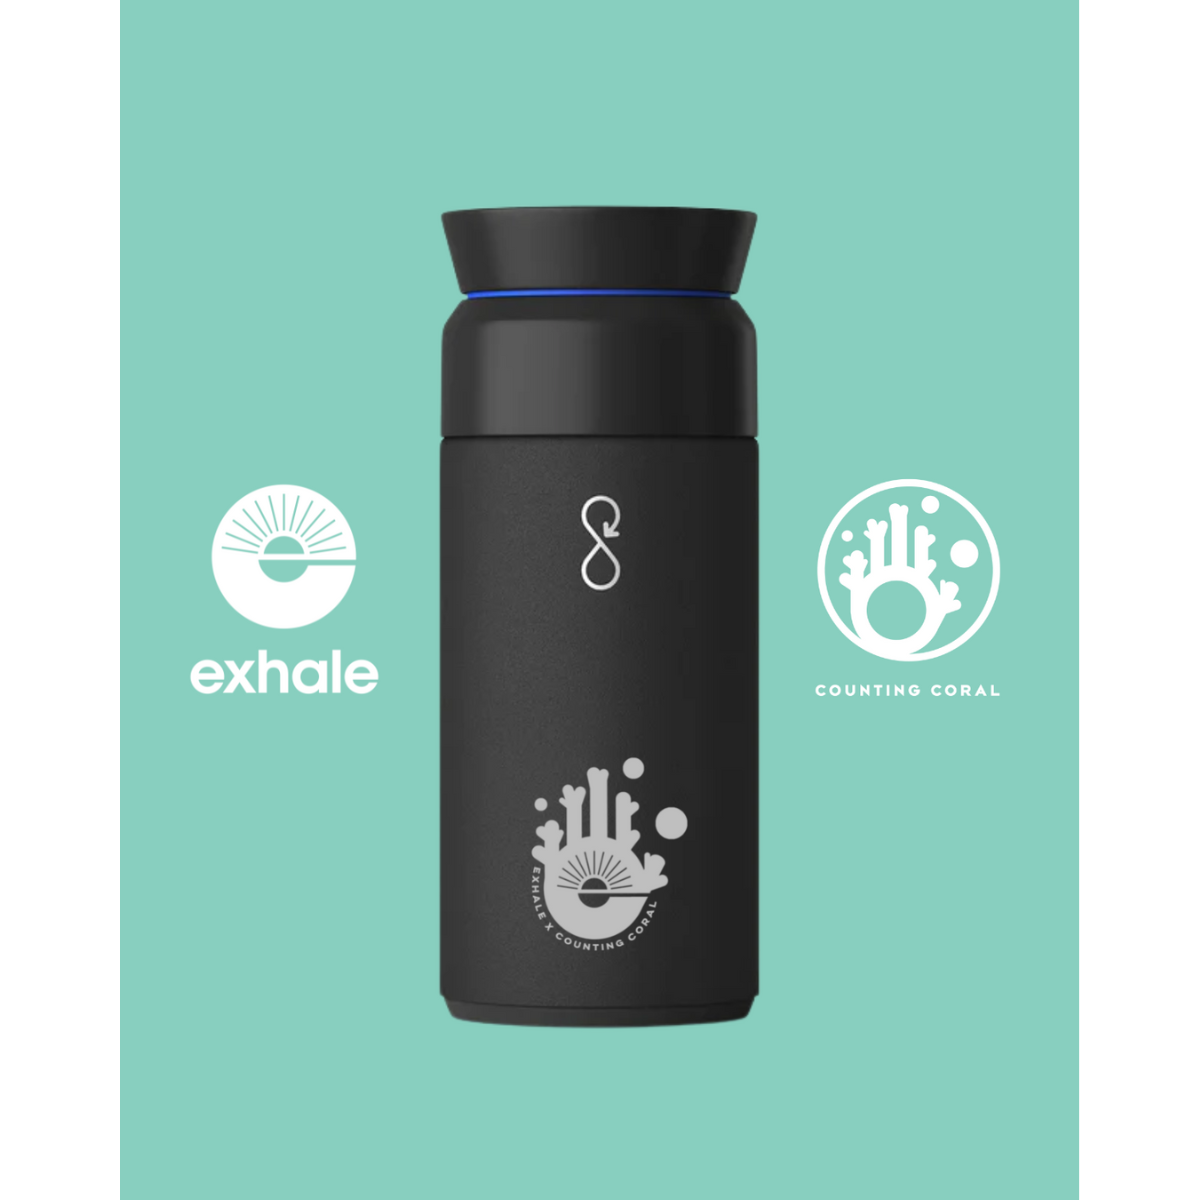 Ocean Bottle Brew Flask - Counting Coral Collab!